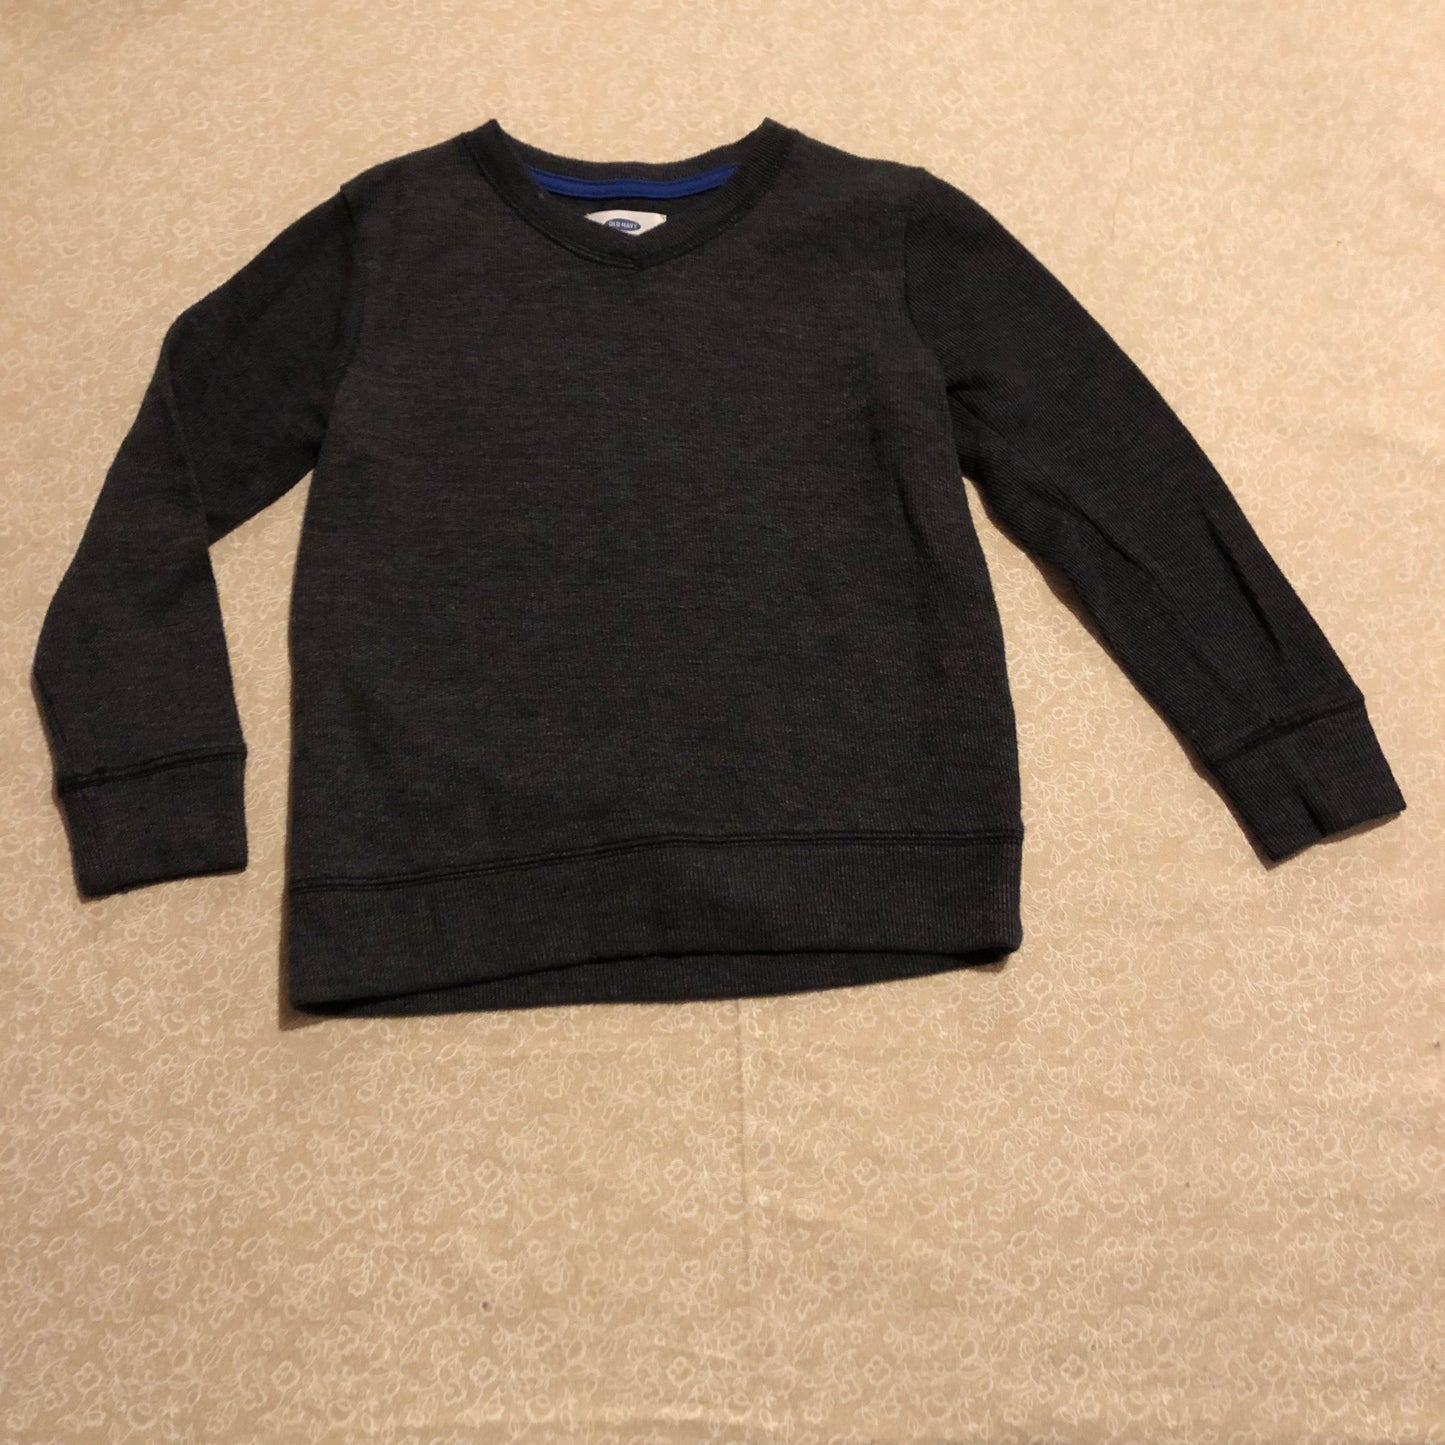 5-sweater-old-navy-grey-knit-pullover